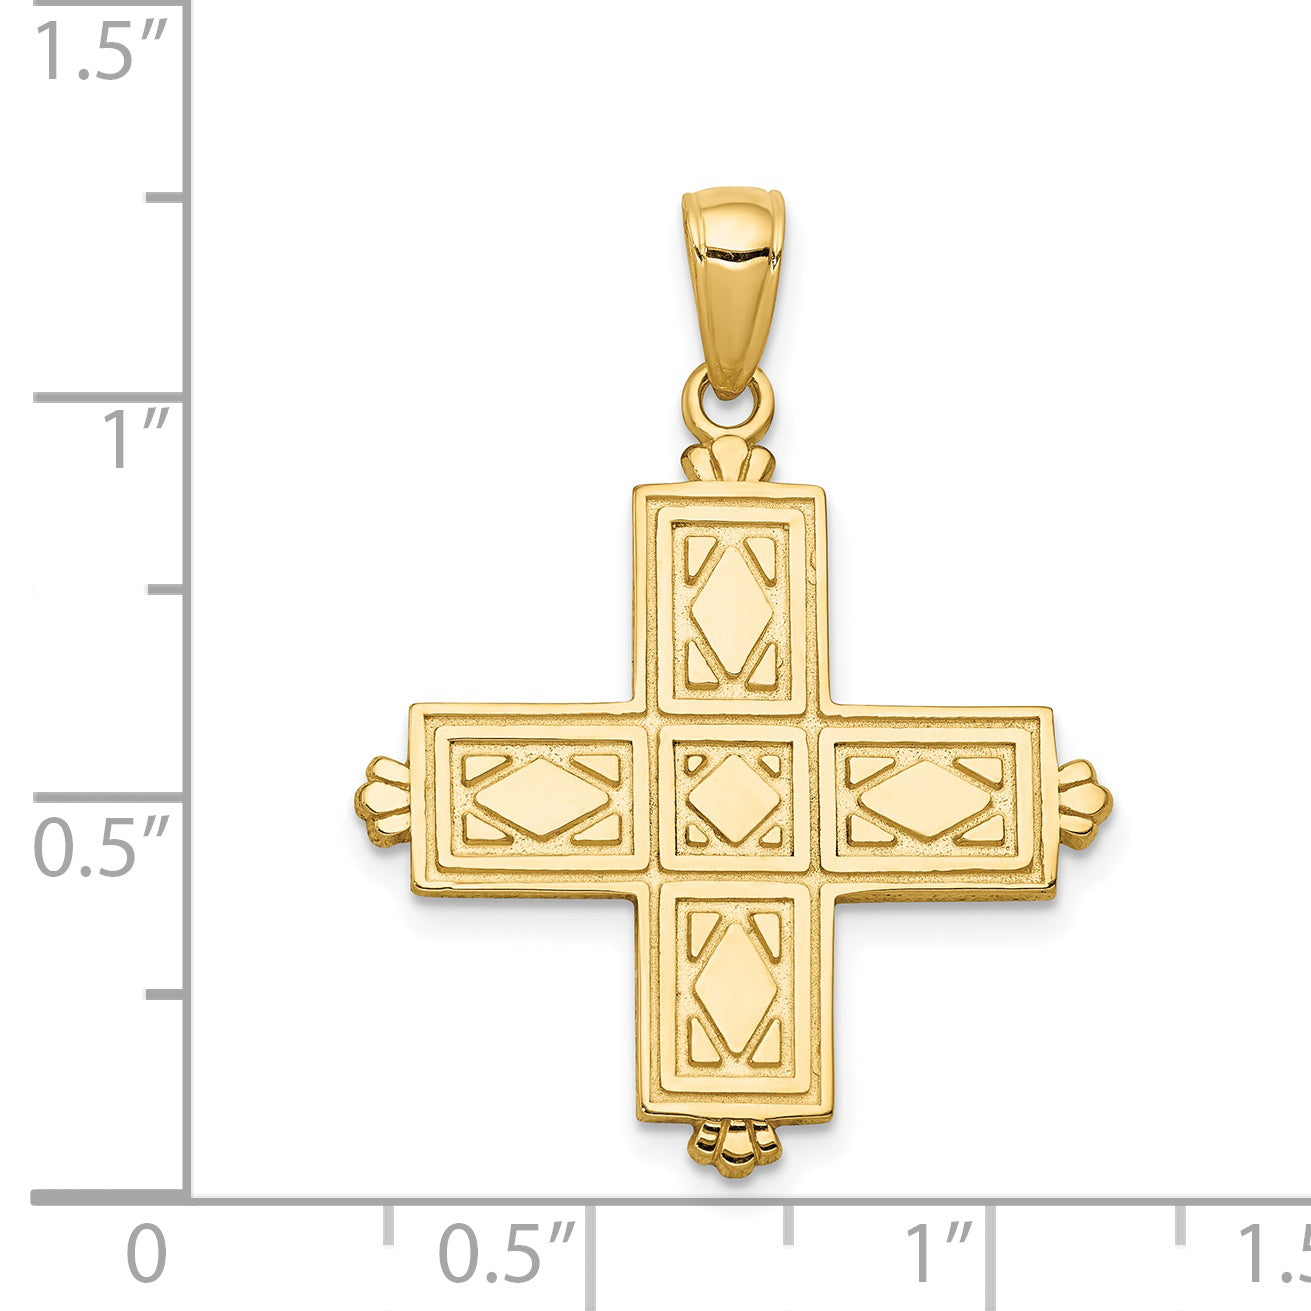 14K Etched Square Cross w/Crown Tips Pendant